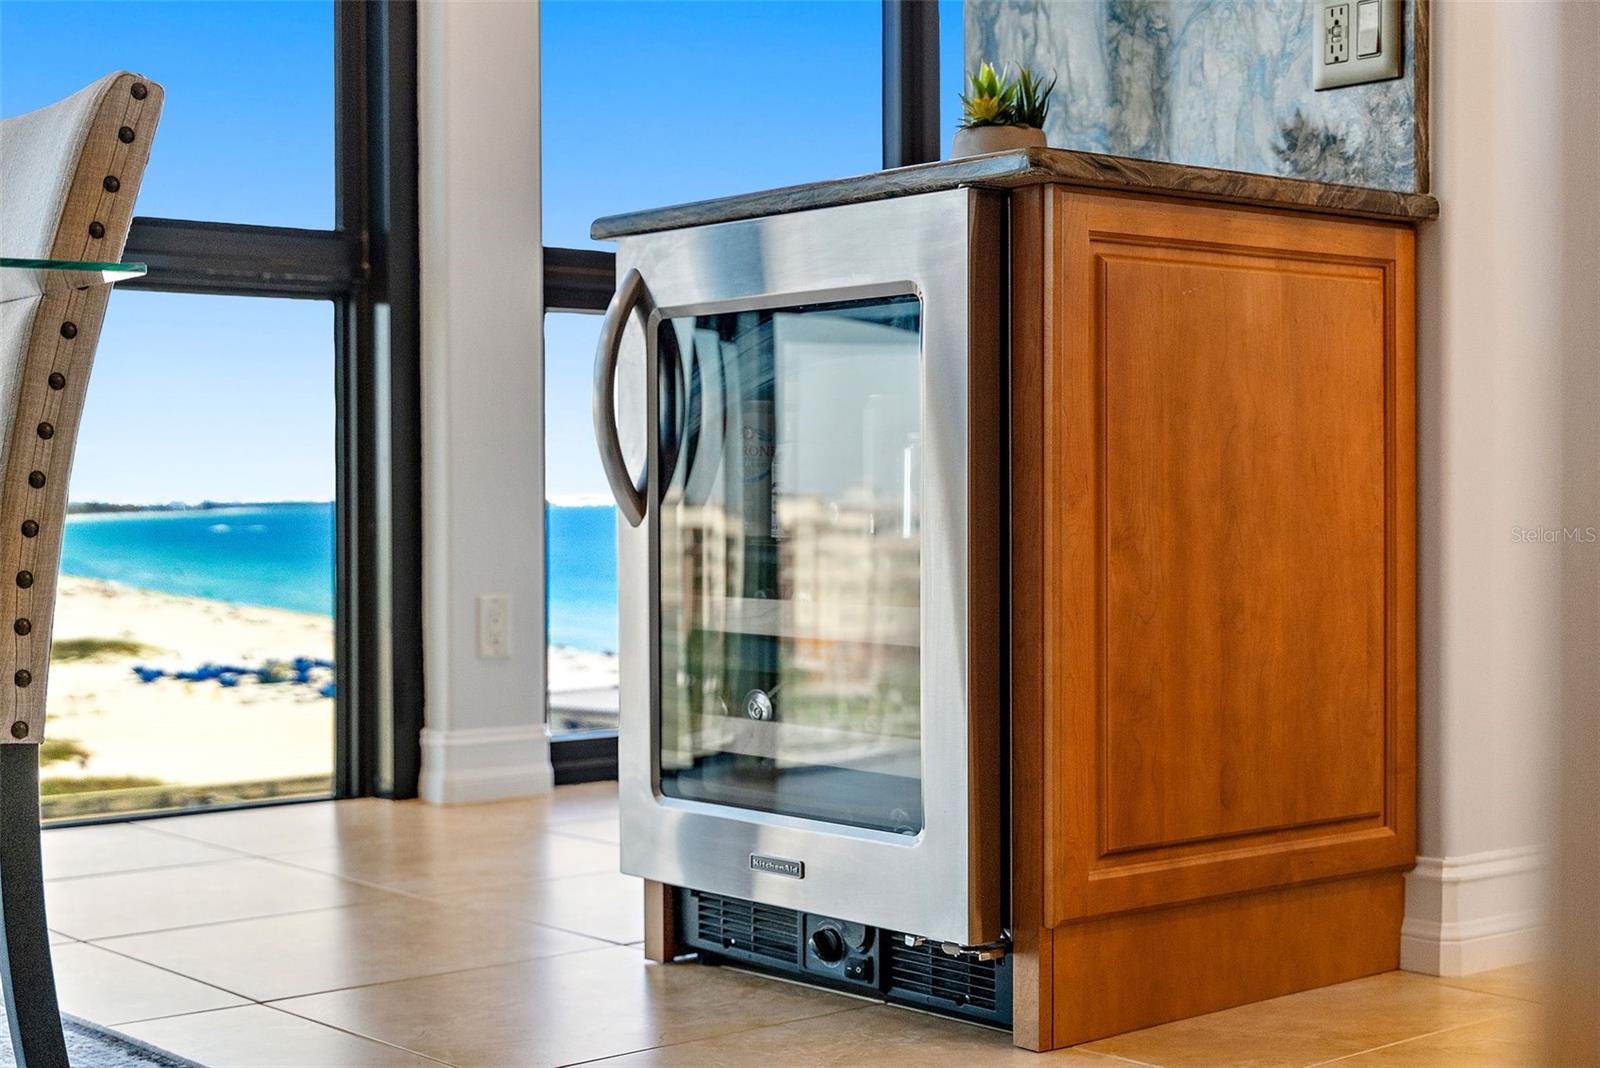 You can catch a glimpse of the beverage fridge here to the near-left corner. The wine fridge and dry bar is a nice feature, both practical and stylish!